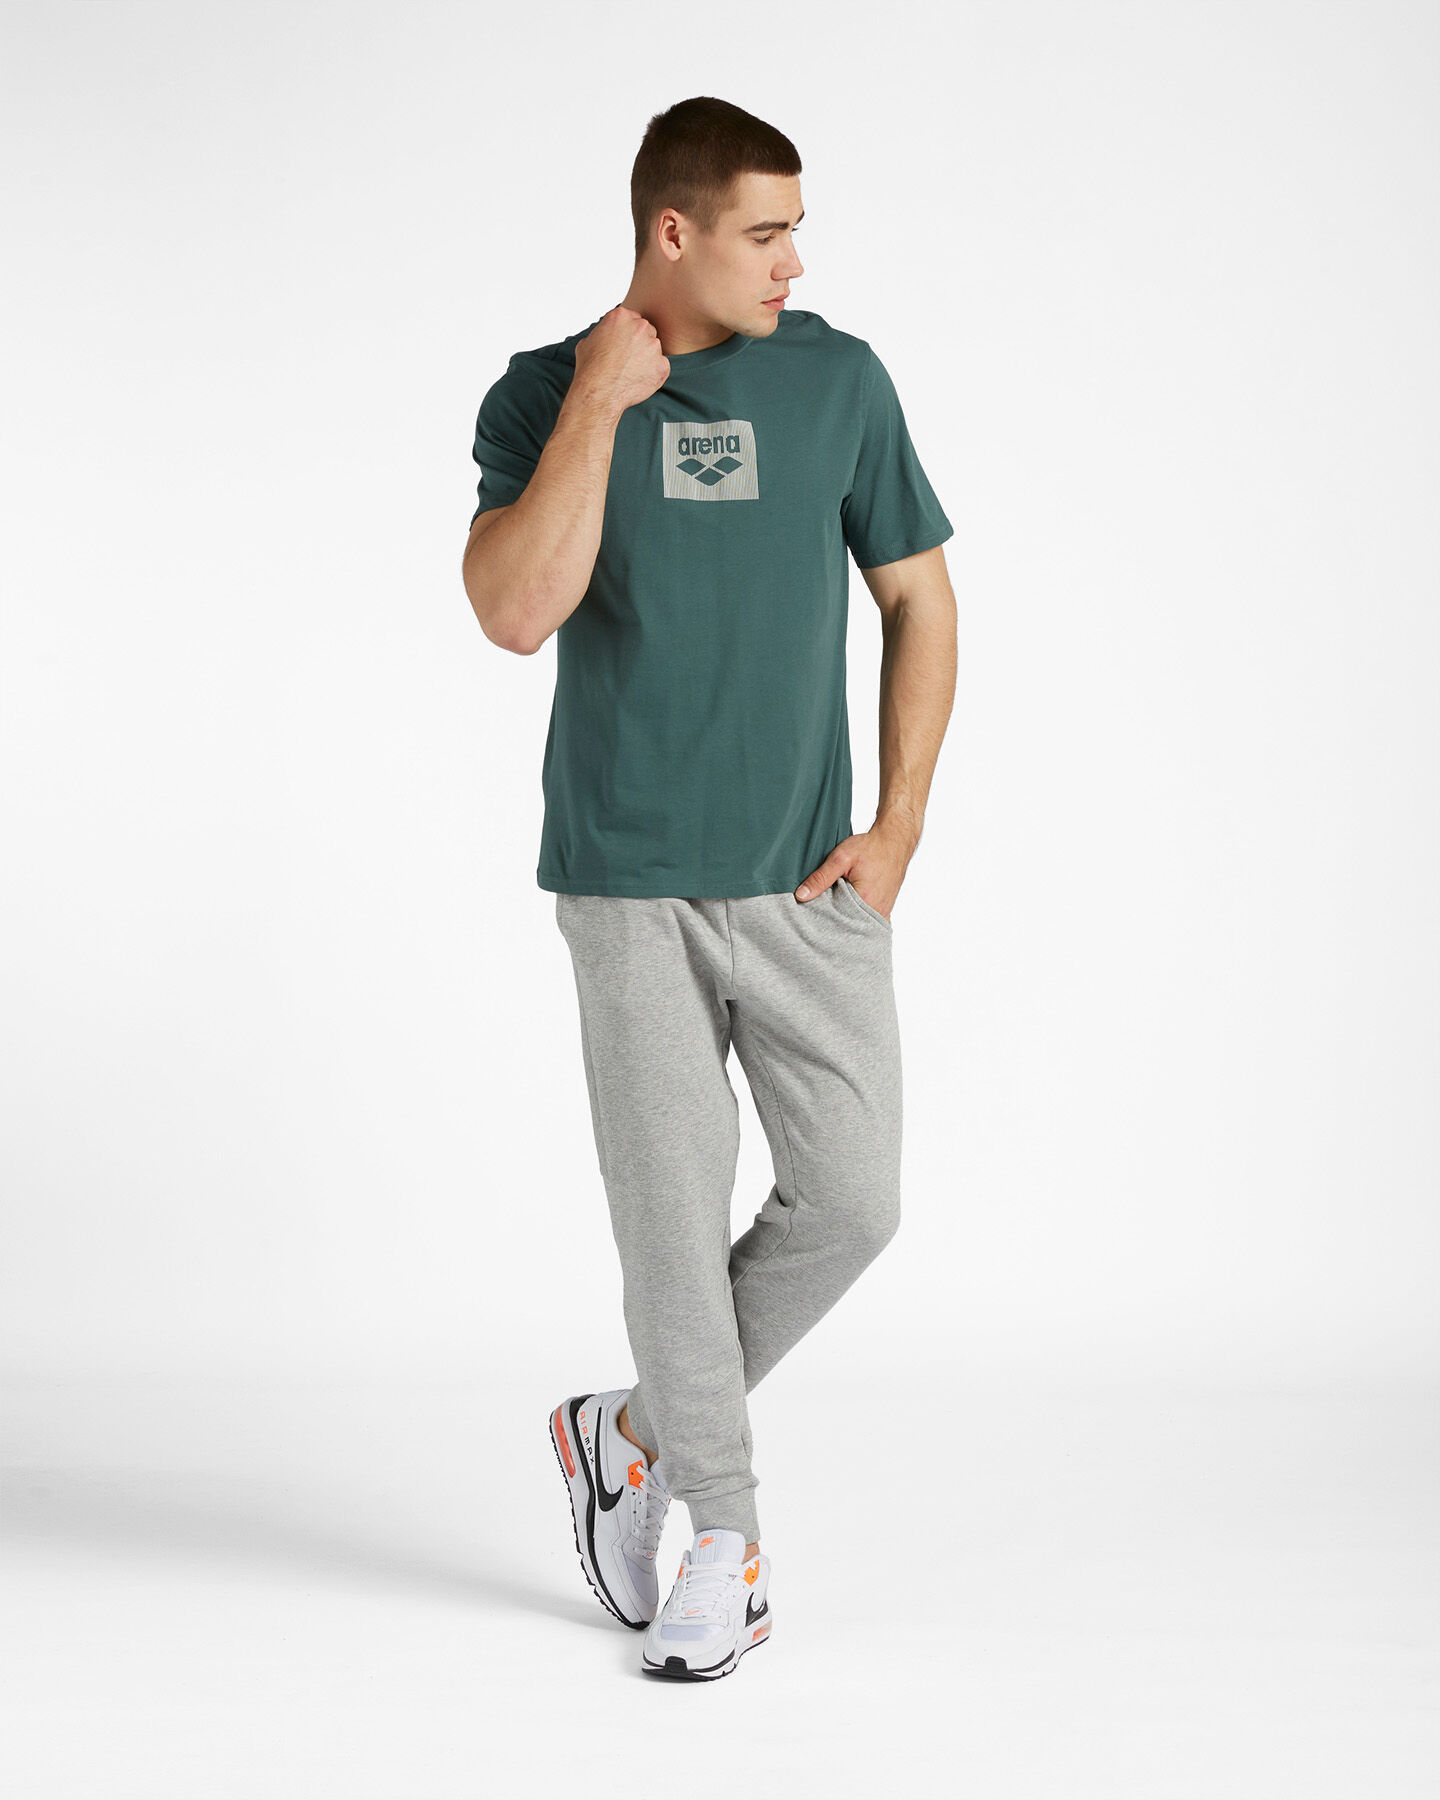  T-Shirt ARENA LIFESTYLE M S4101022|780|S scatto 1